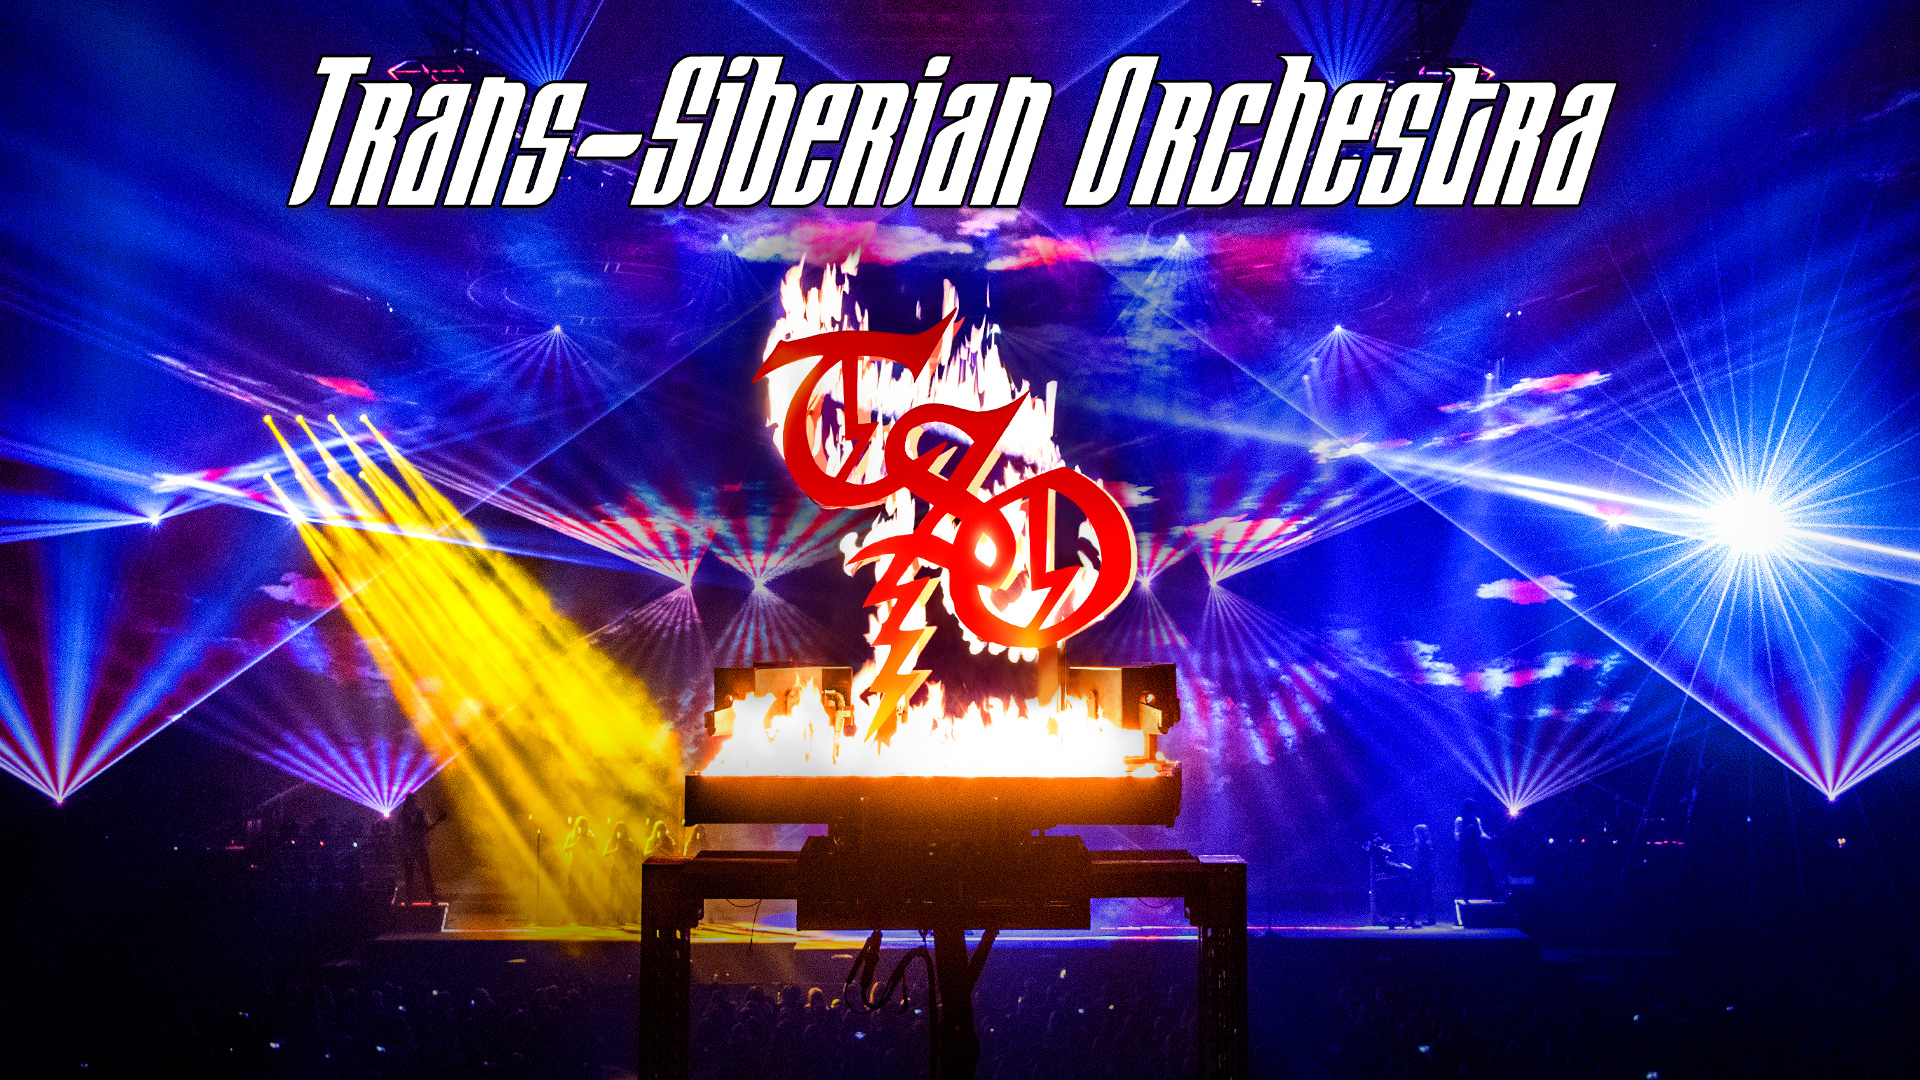 Trans-Siberian Orchestra | About